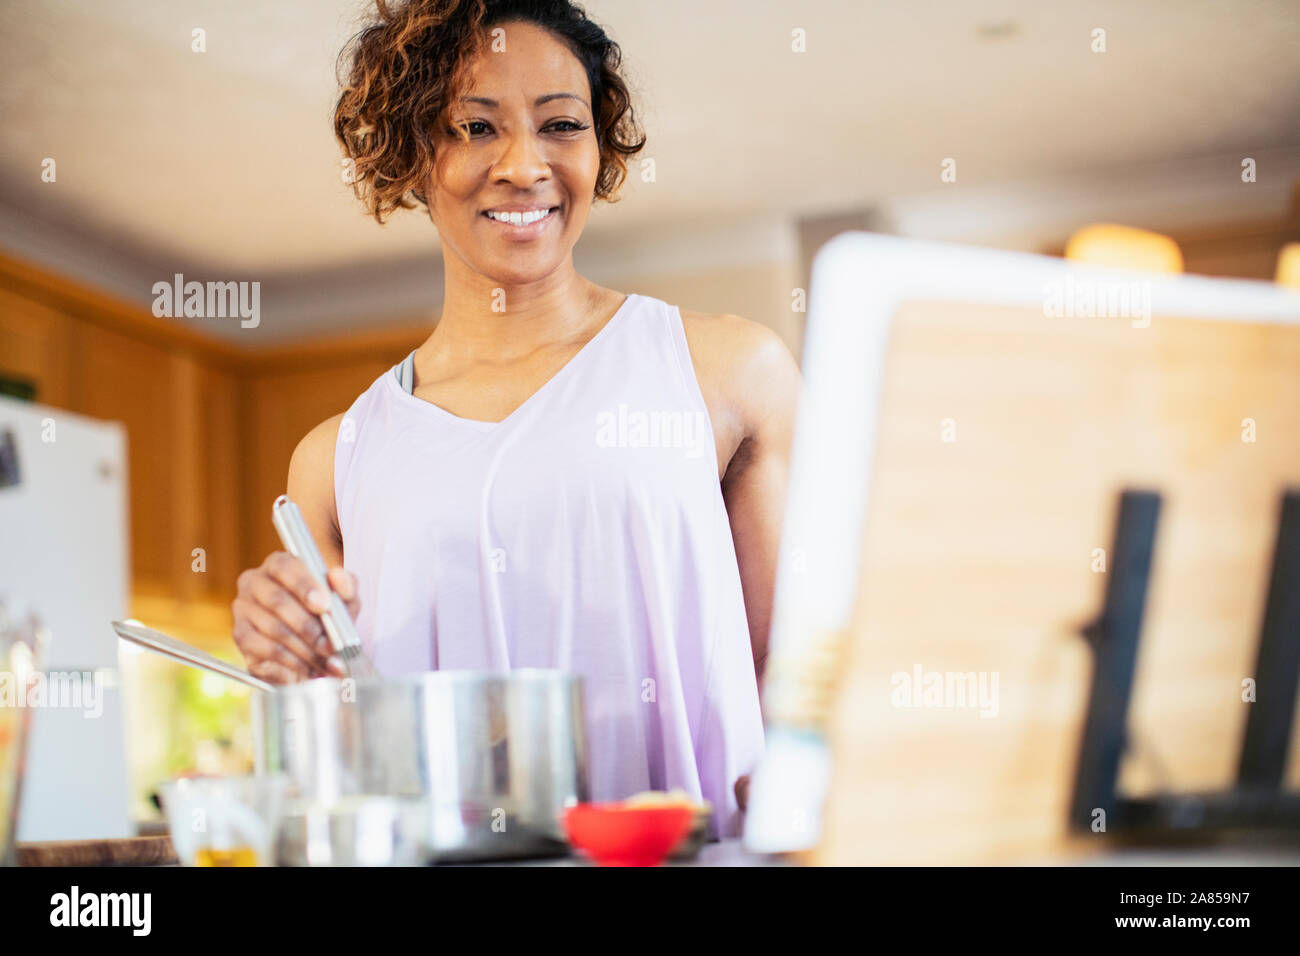 Smiling woman with cookbook cooking in kitchen Stock Photo